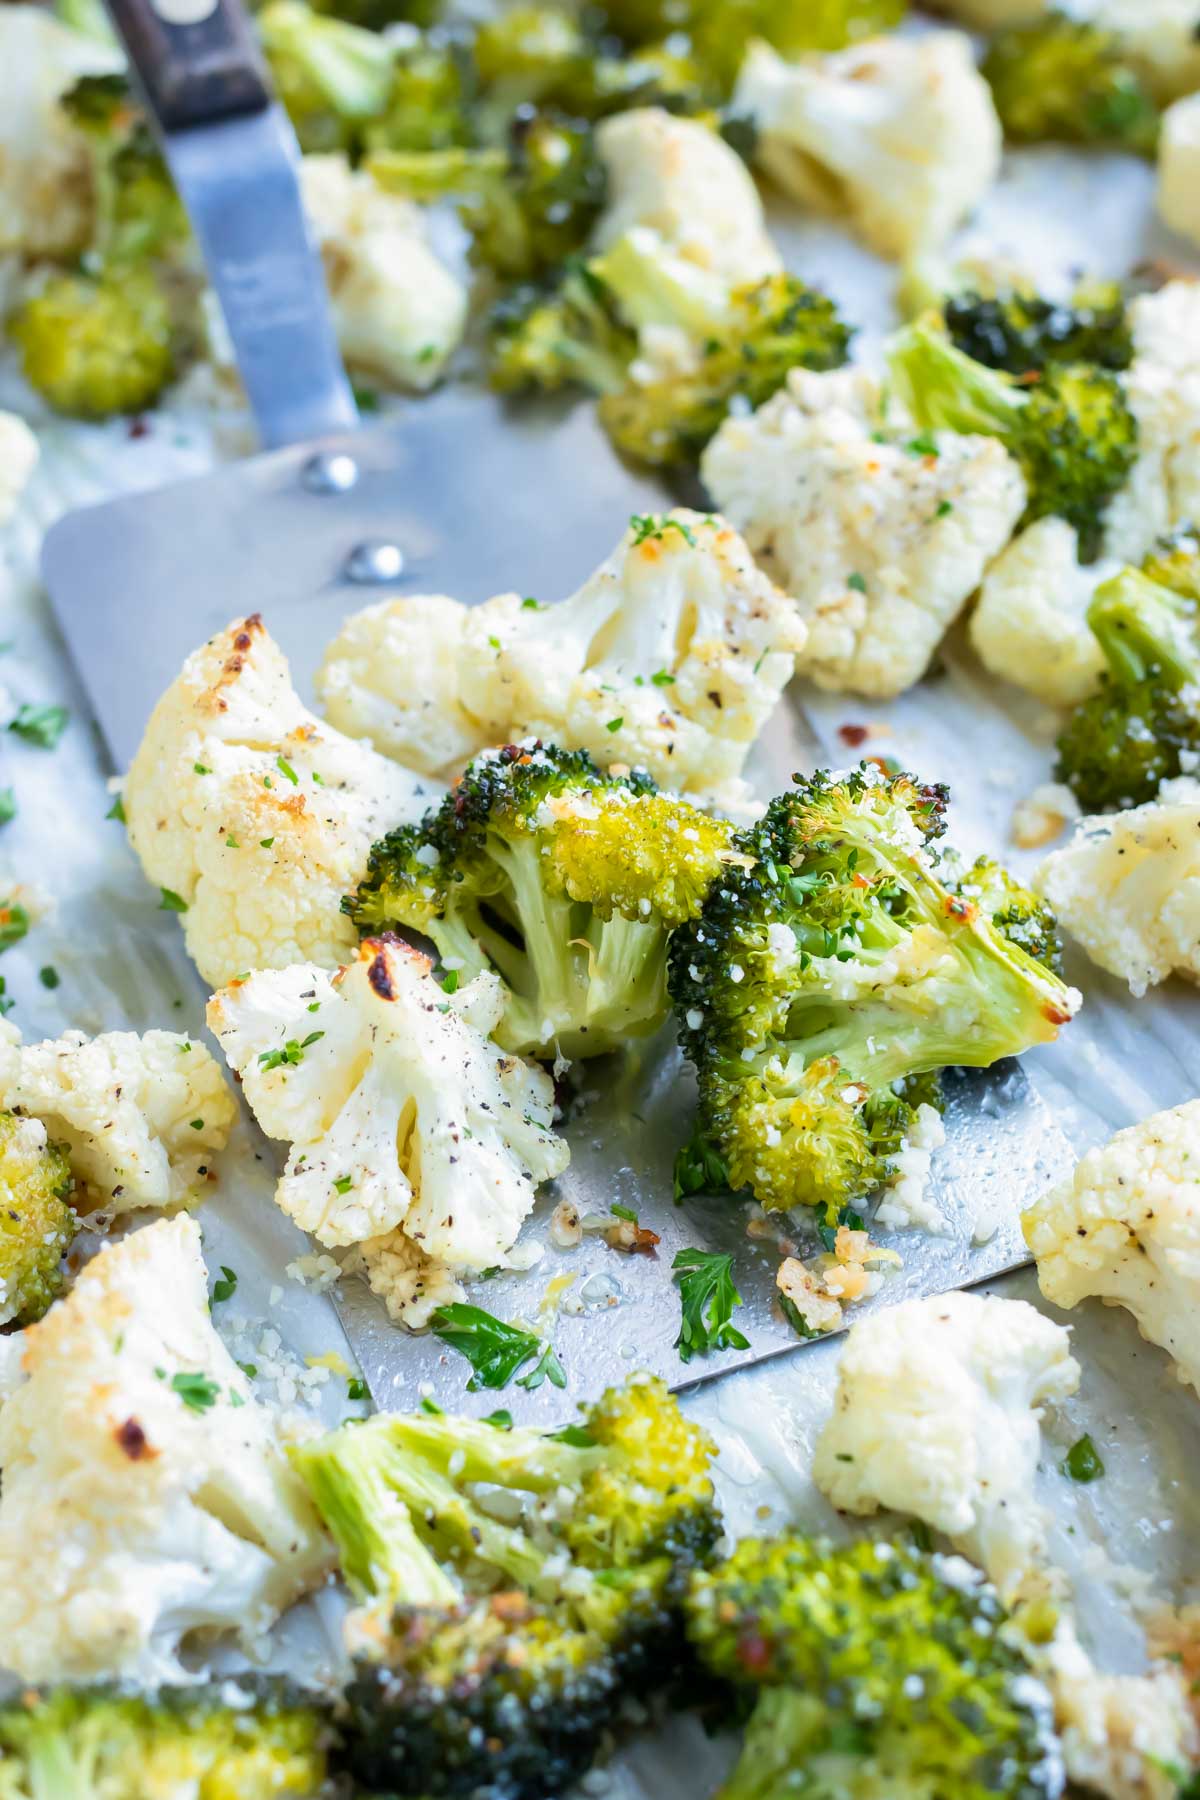 Parmesan roasted broccoli and cauliflower are baked on parchment paper for easy removal from the oven.